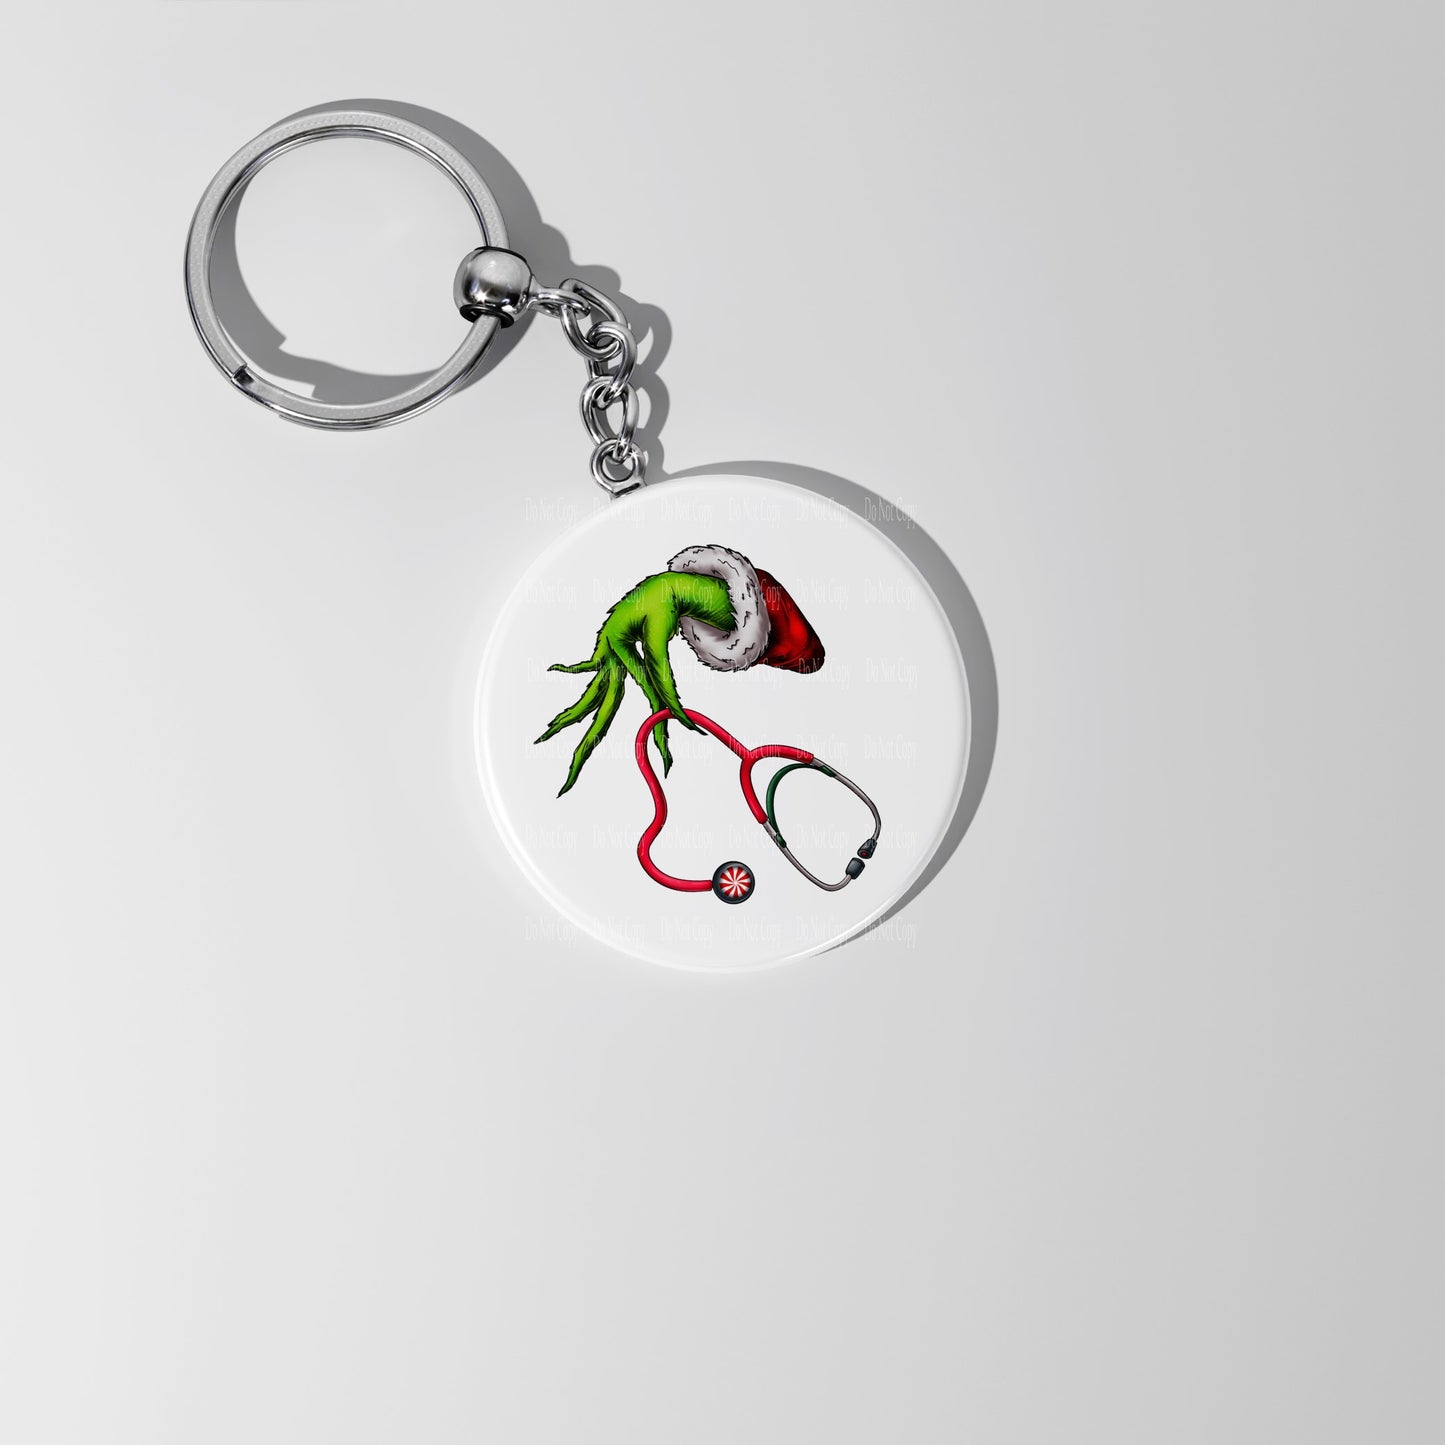 Grinch with Stethoscope for Nurse or CNA Key chain